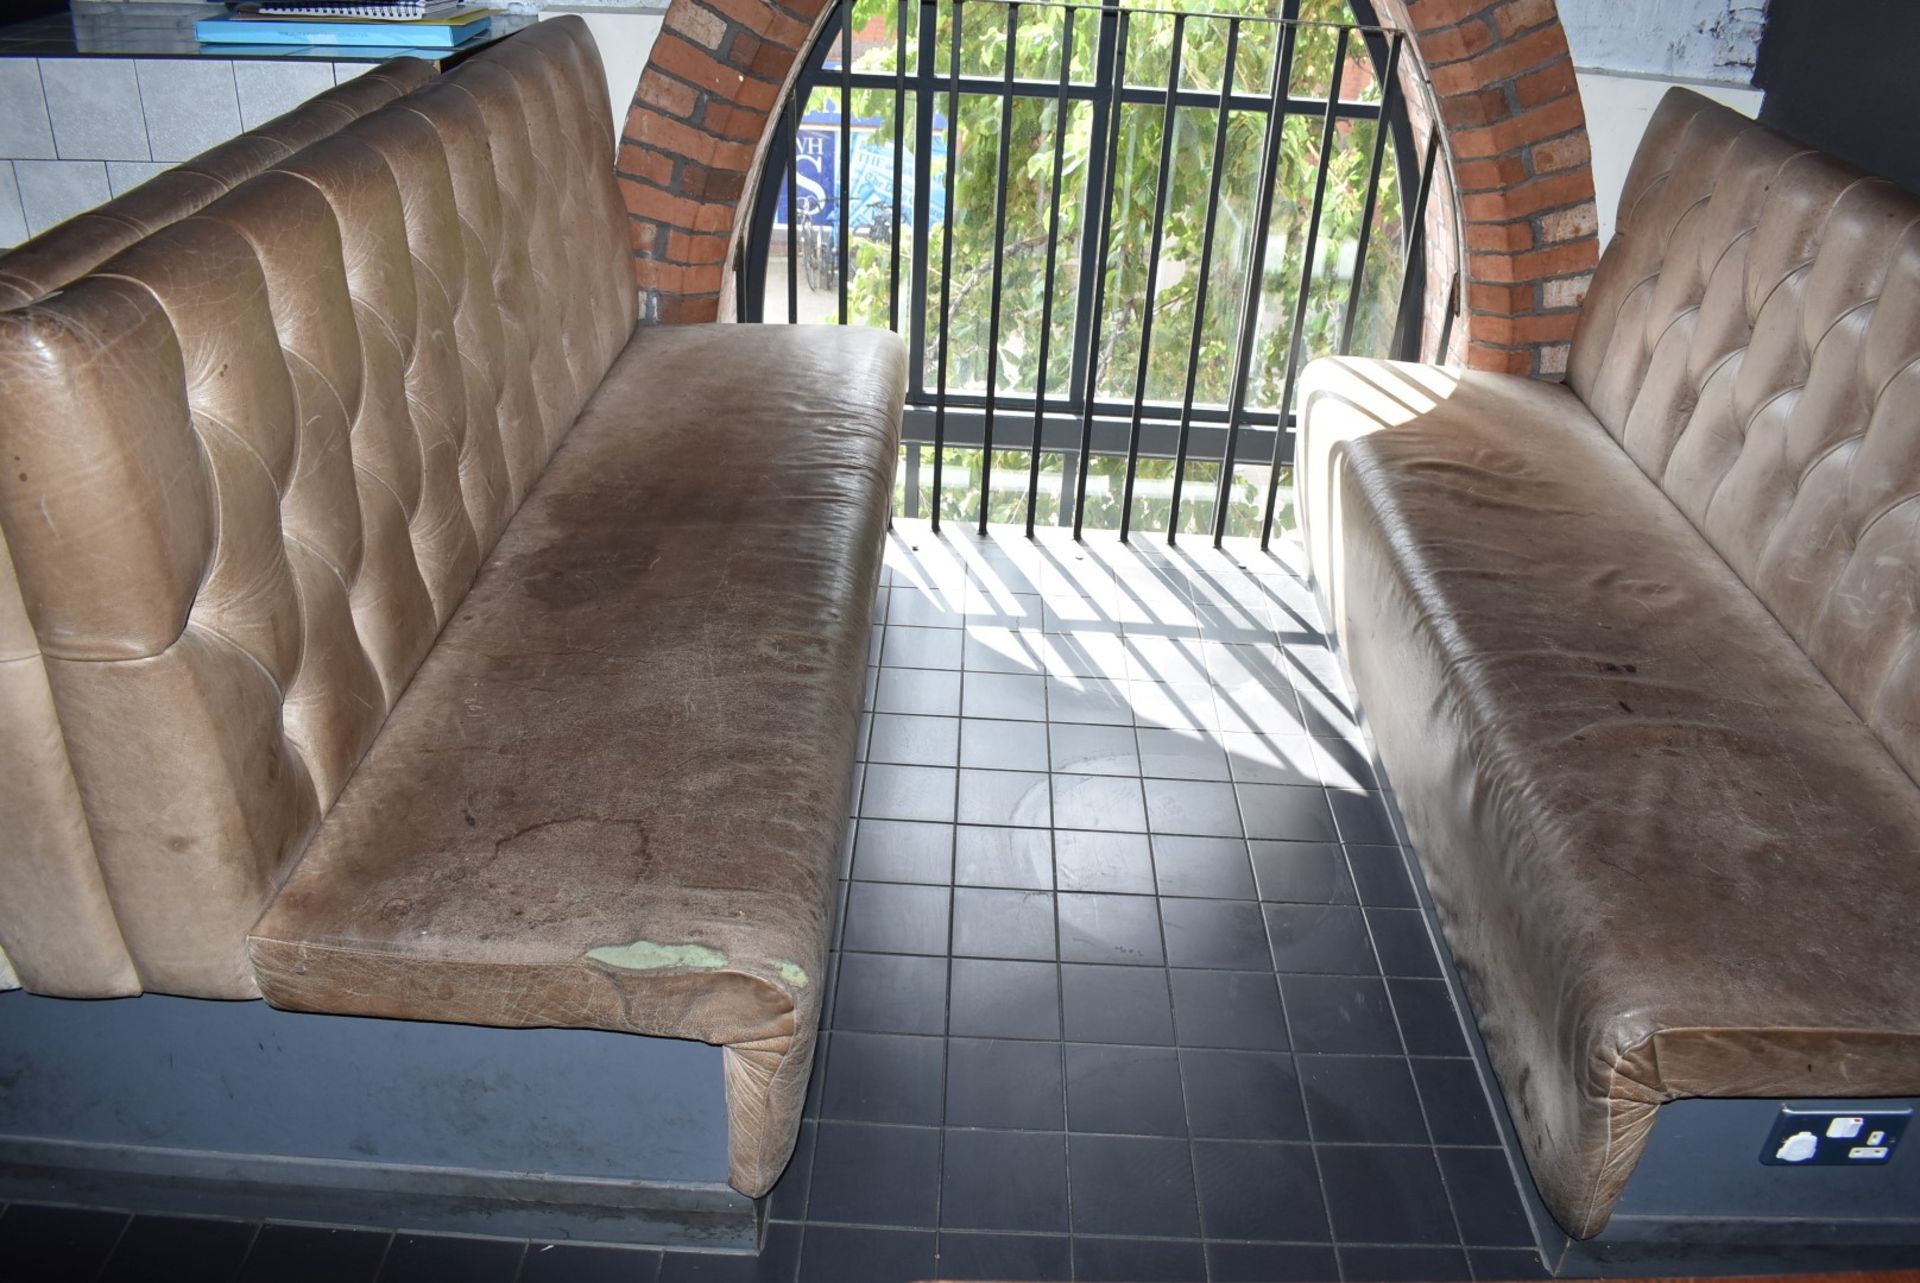 1 x Collection of Restaurant Seating Benches With Brown Leather Upholstery and Studded Backs - Image 3 of 26